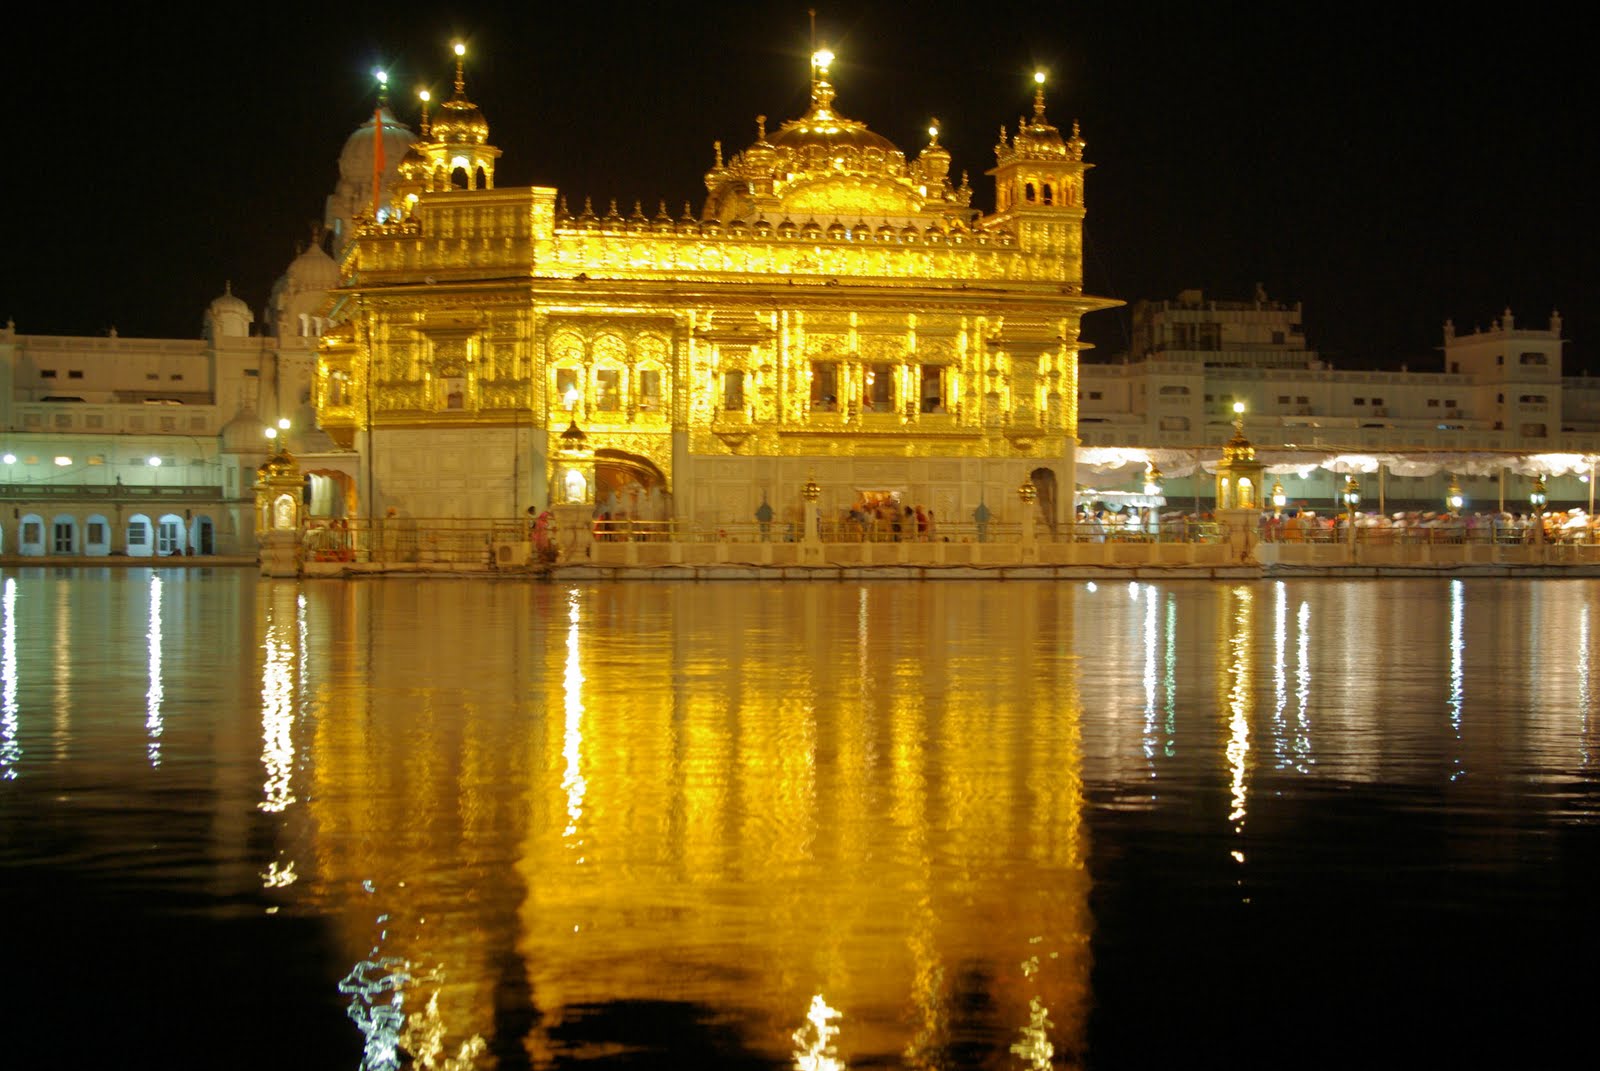 The Golden Temple's Foundation